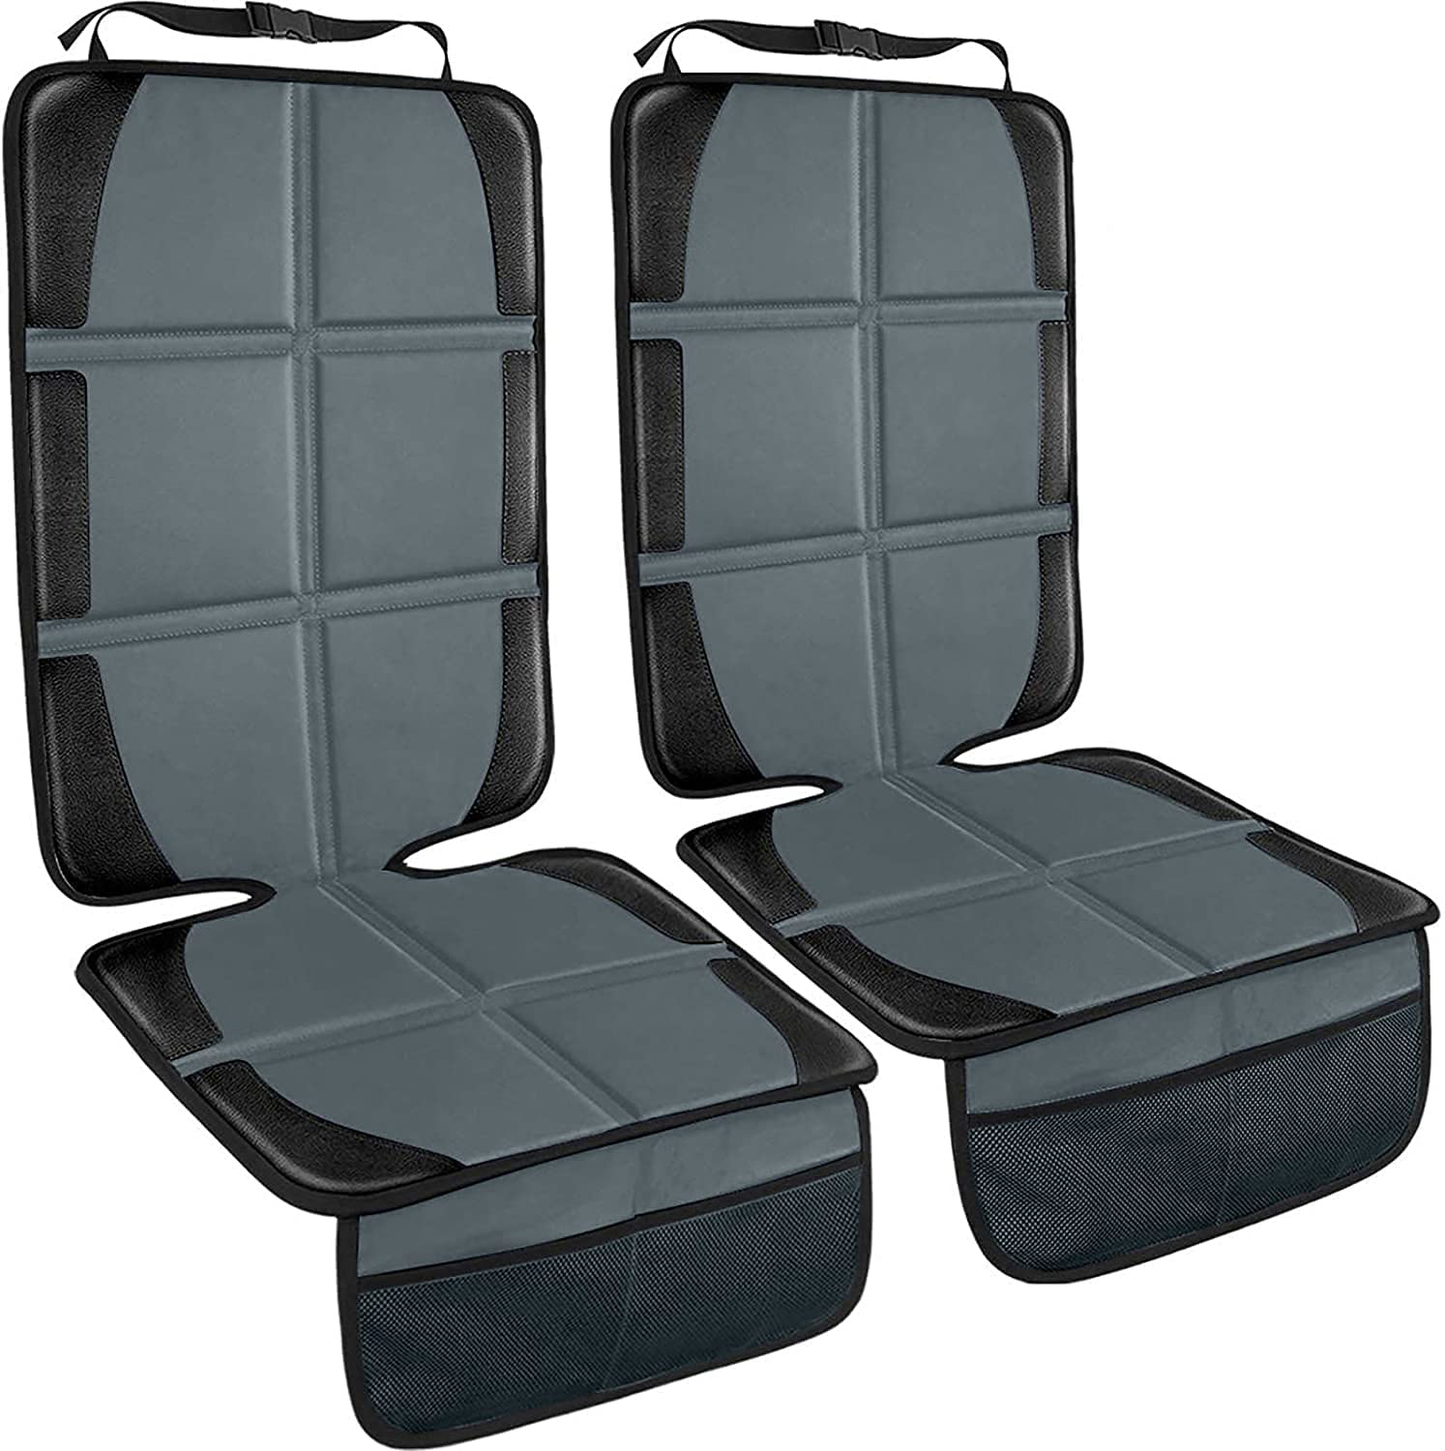 Car Seat Protector, 2 Pack Large Thick Carseat Seat Protector with Organizer Pockets, Vehicle Dog Cover Pad for SUV Sedan Truck Leather Seats